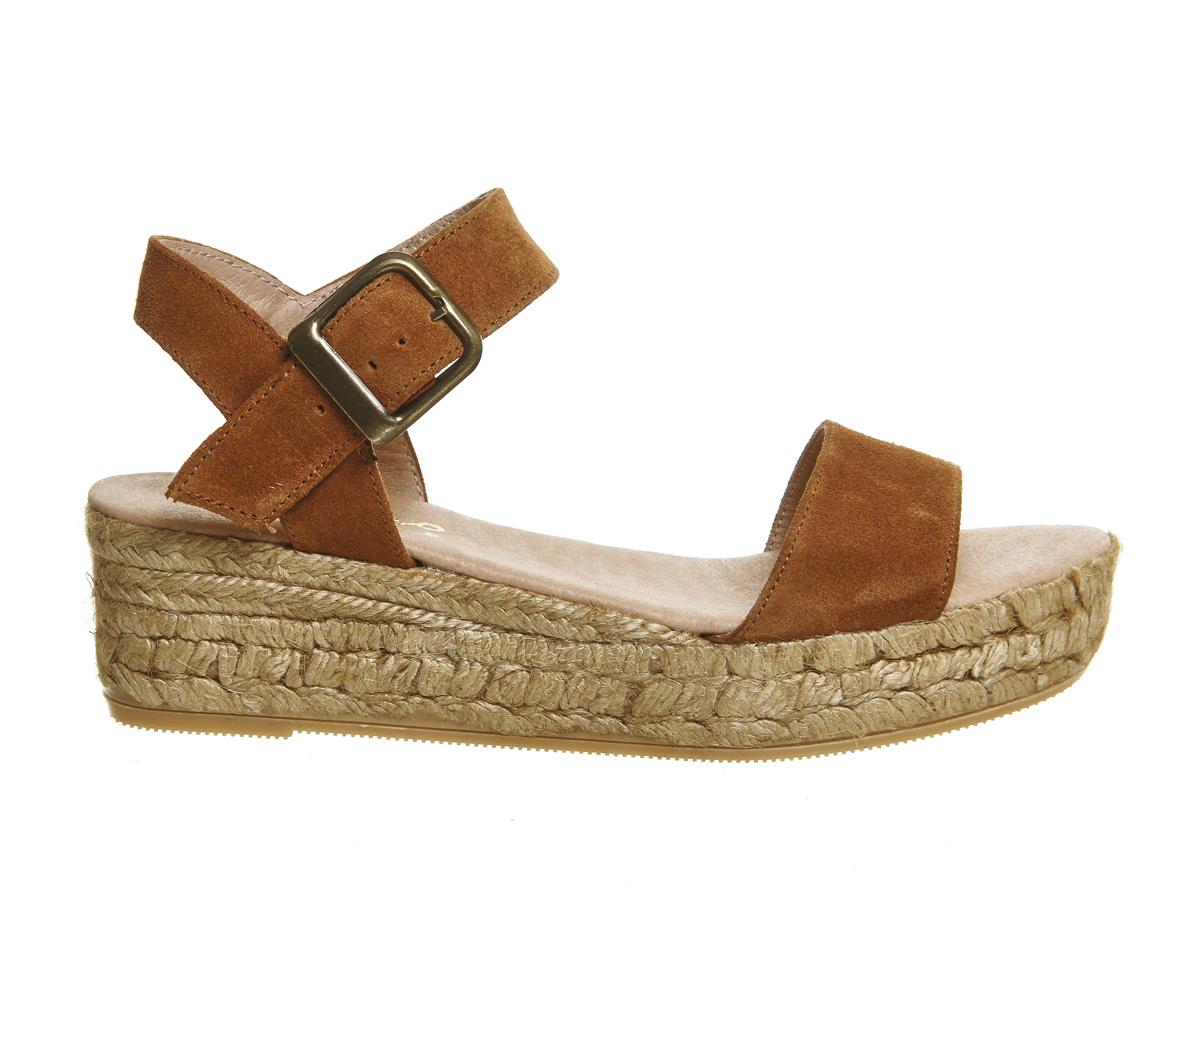 Gaimo for OFFICE Jyle Flatform Sandals Brown Suede - Women’s Sandals